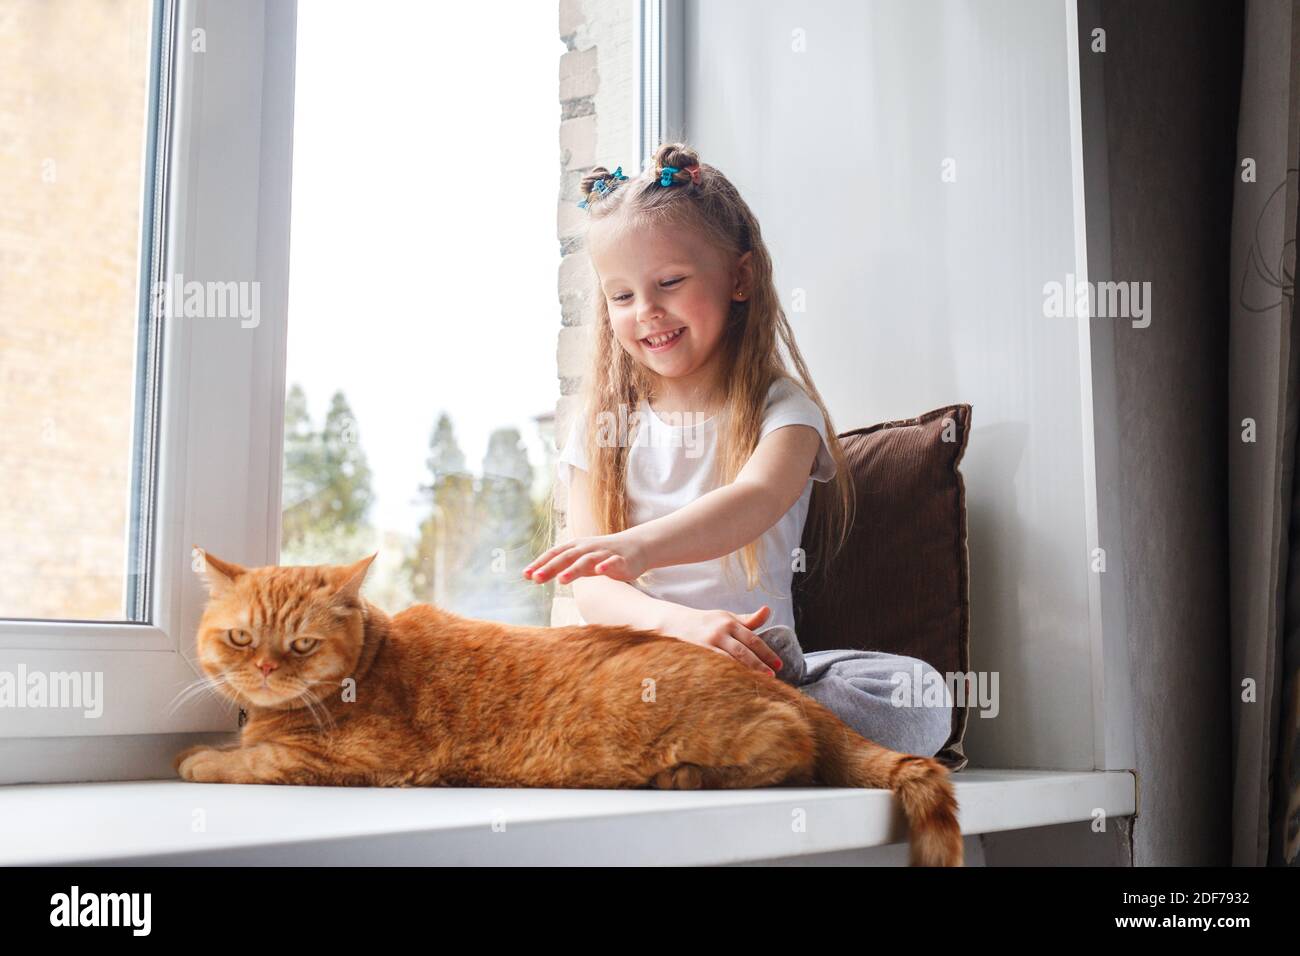 Little girl in pajamas relaxing on a window sill with red cat. Happy weekend with cat at home. Stock Photo